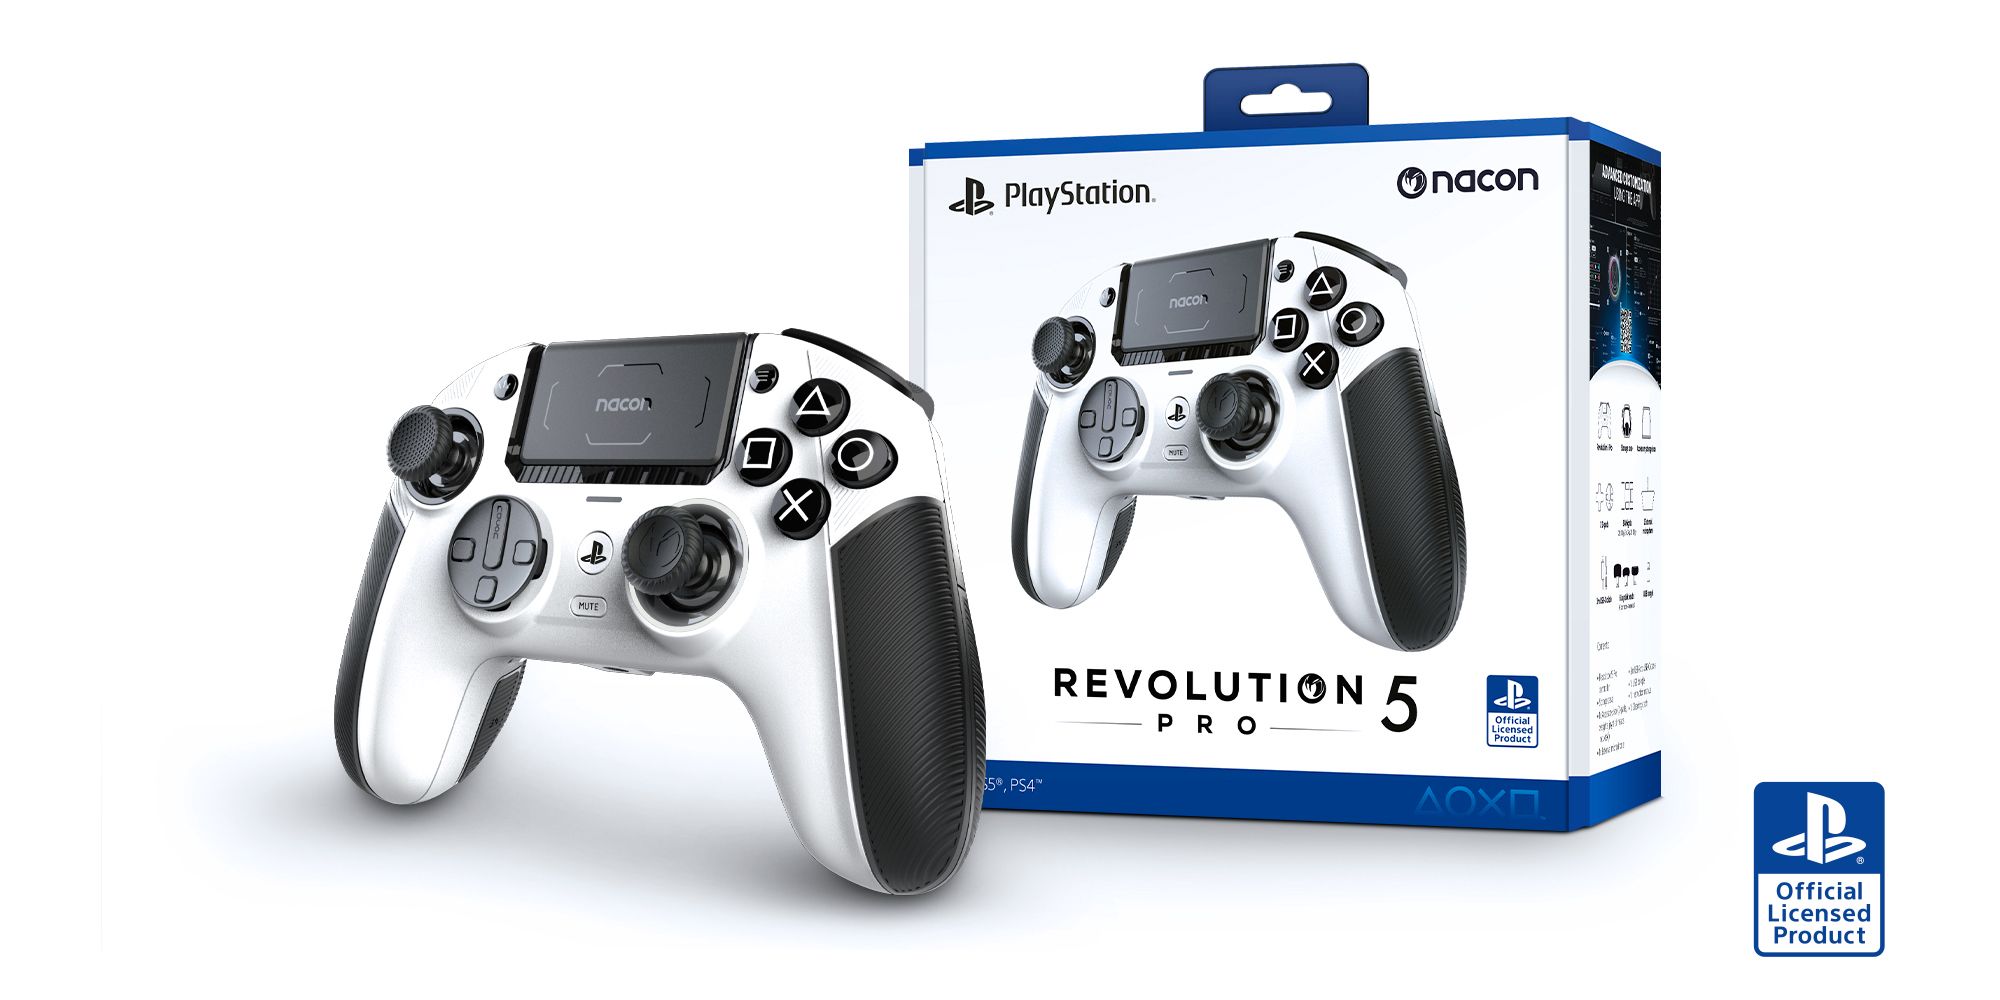 The Nacon Revolution 5 Pro Controller, its box and an official PlayStation Licensed Product badge